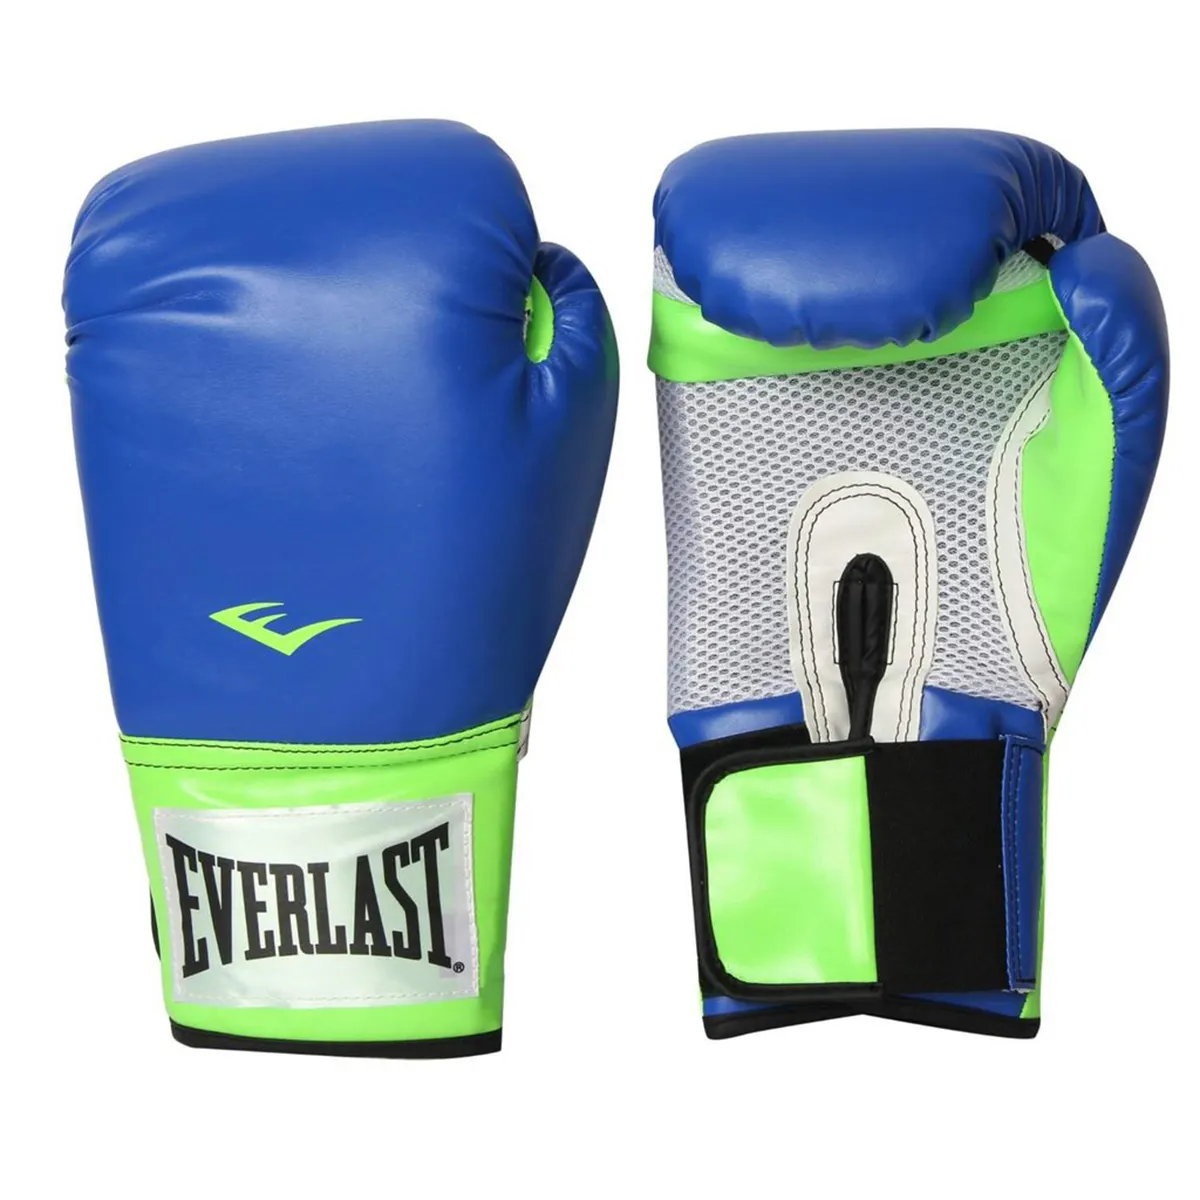 NEW Adult Everlast Pro Boxing Training Gloves 16 oz blue/green sparring ... - $29.95